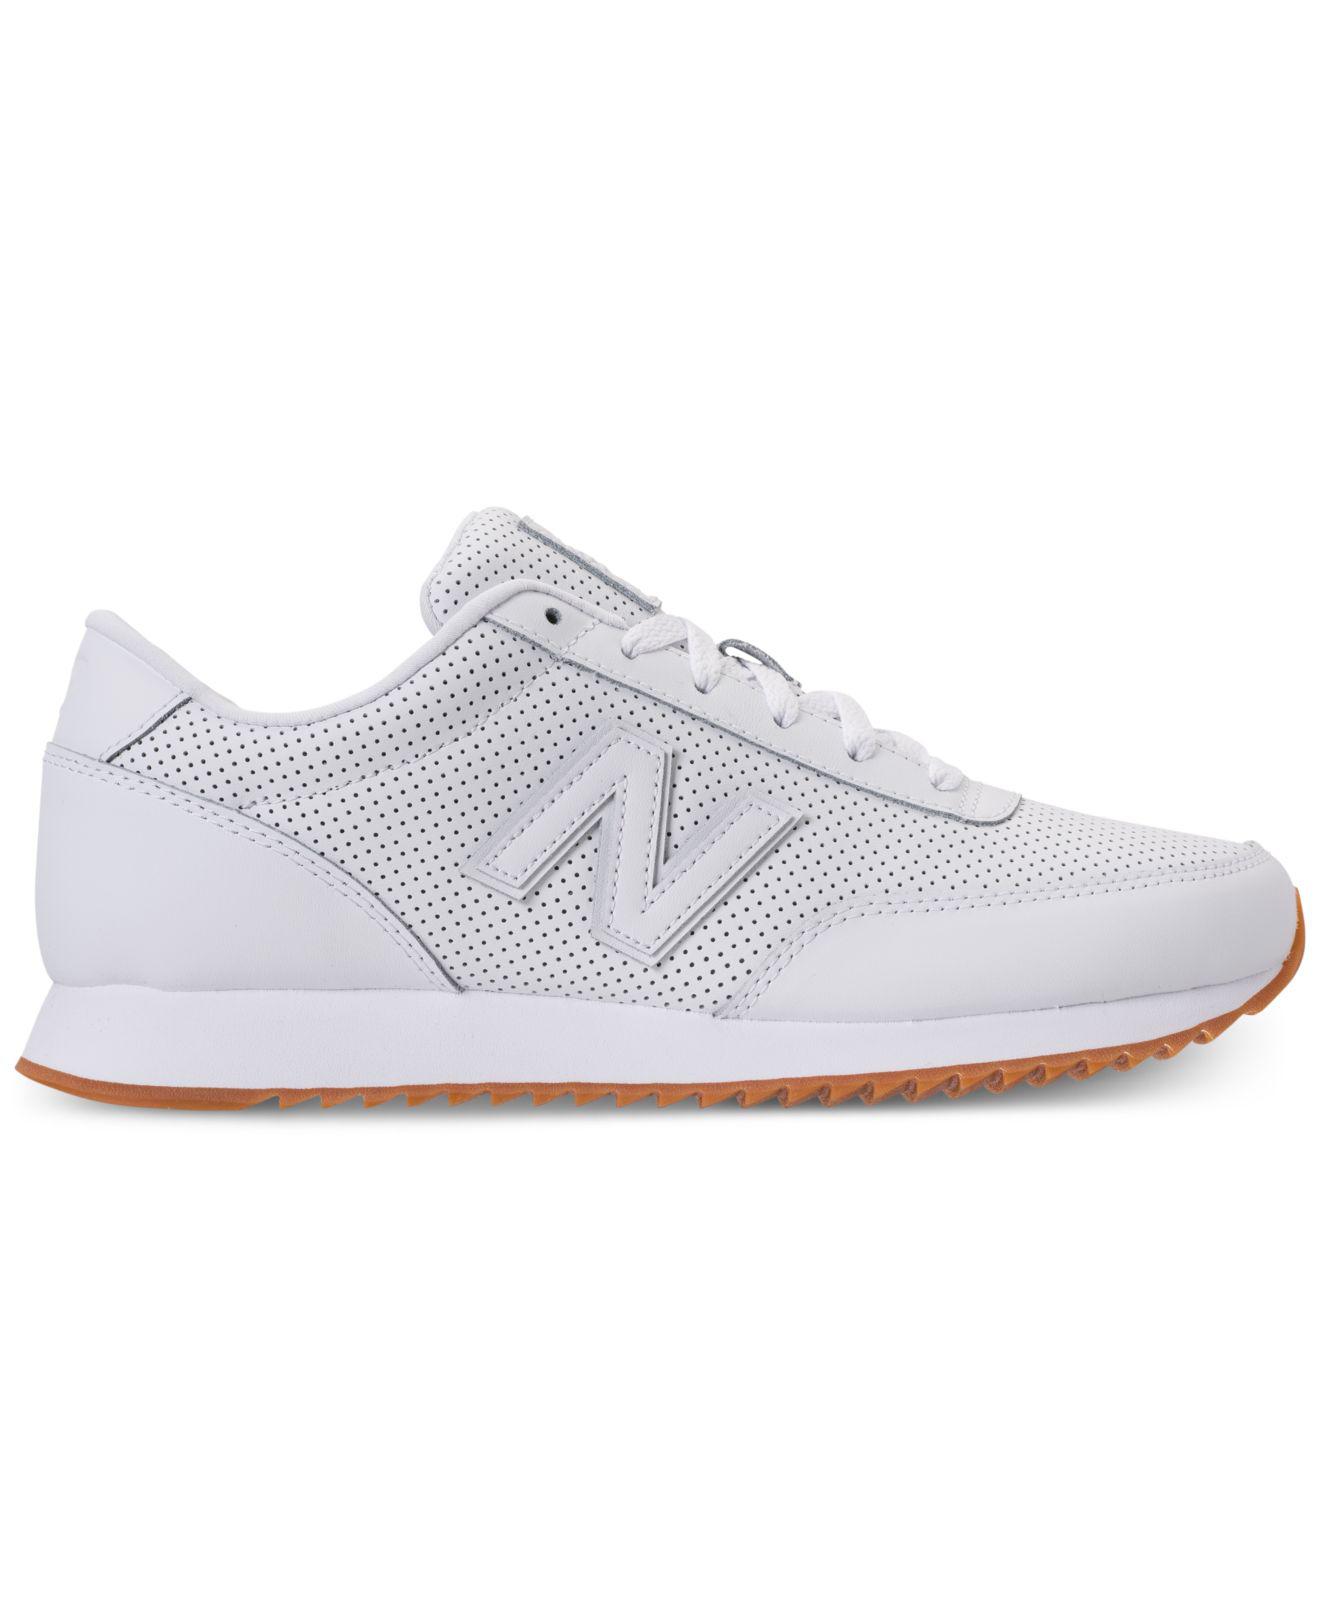 New Balance 501 Leather Sneakers From 